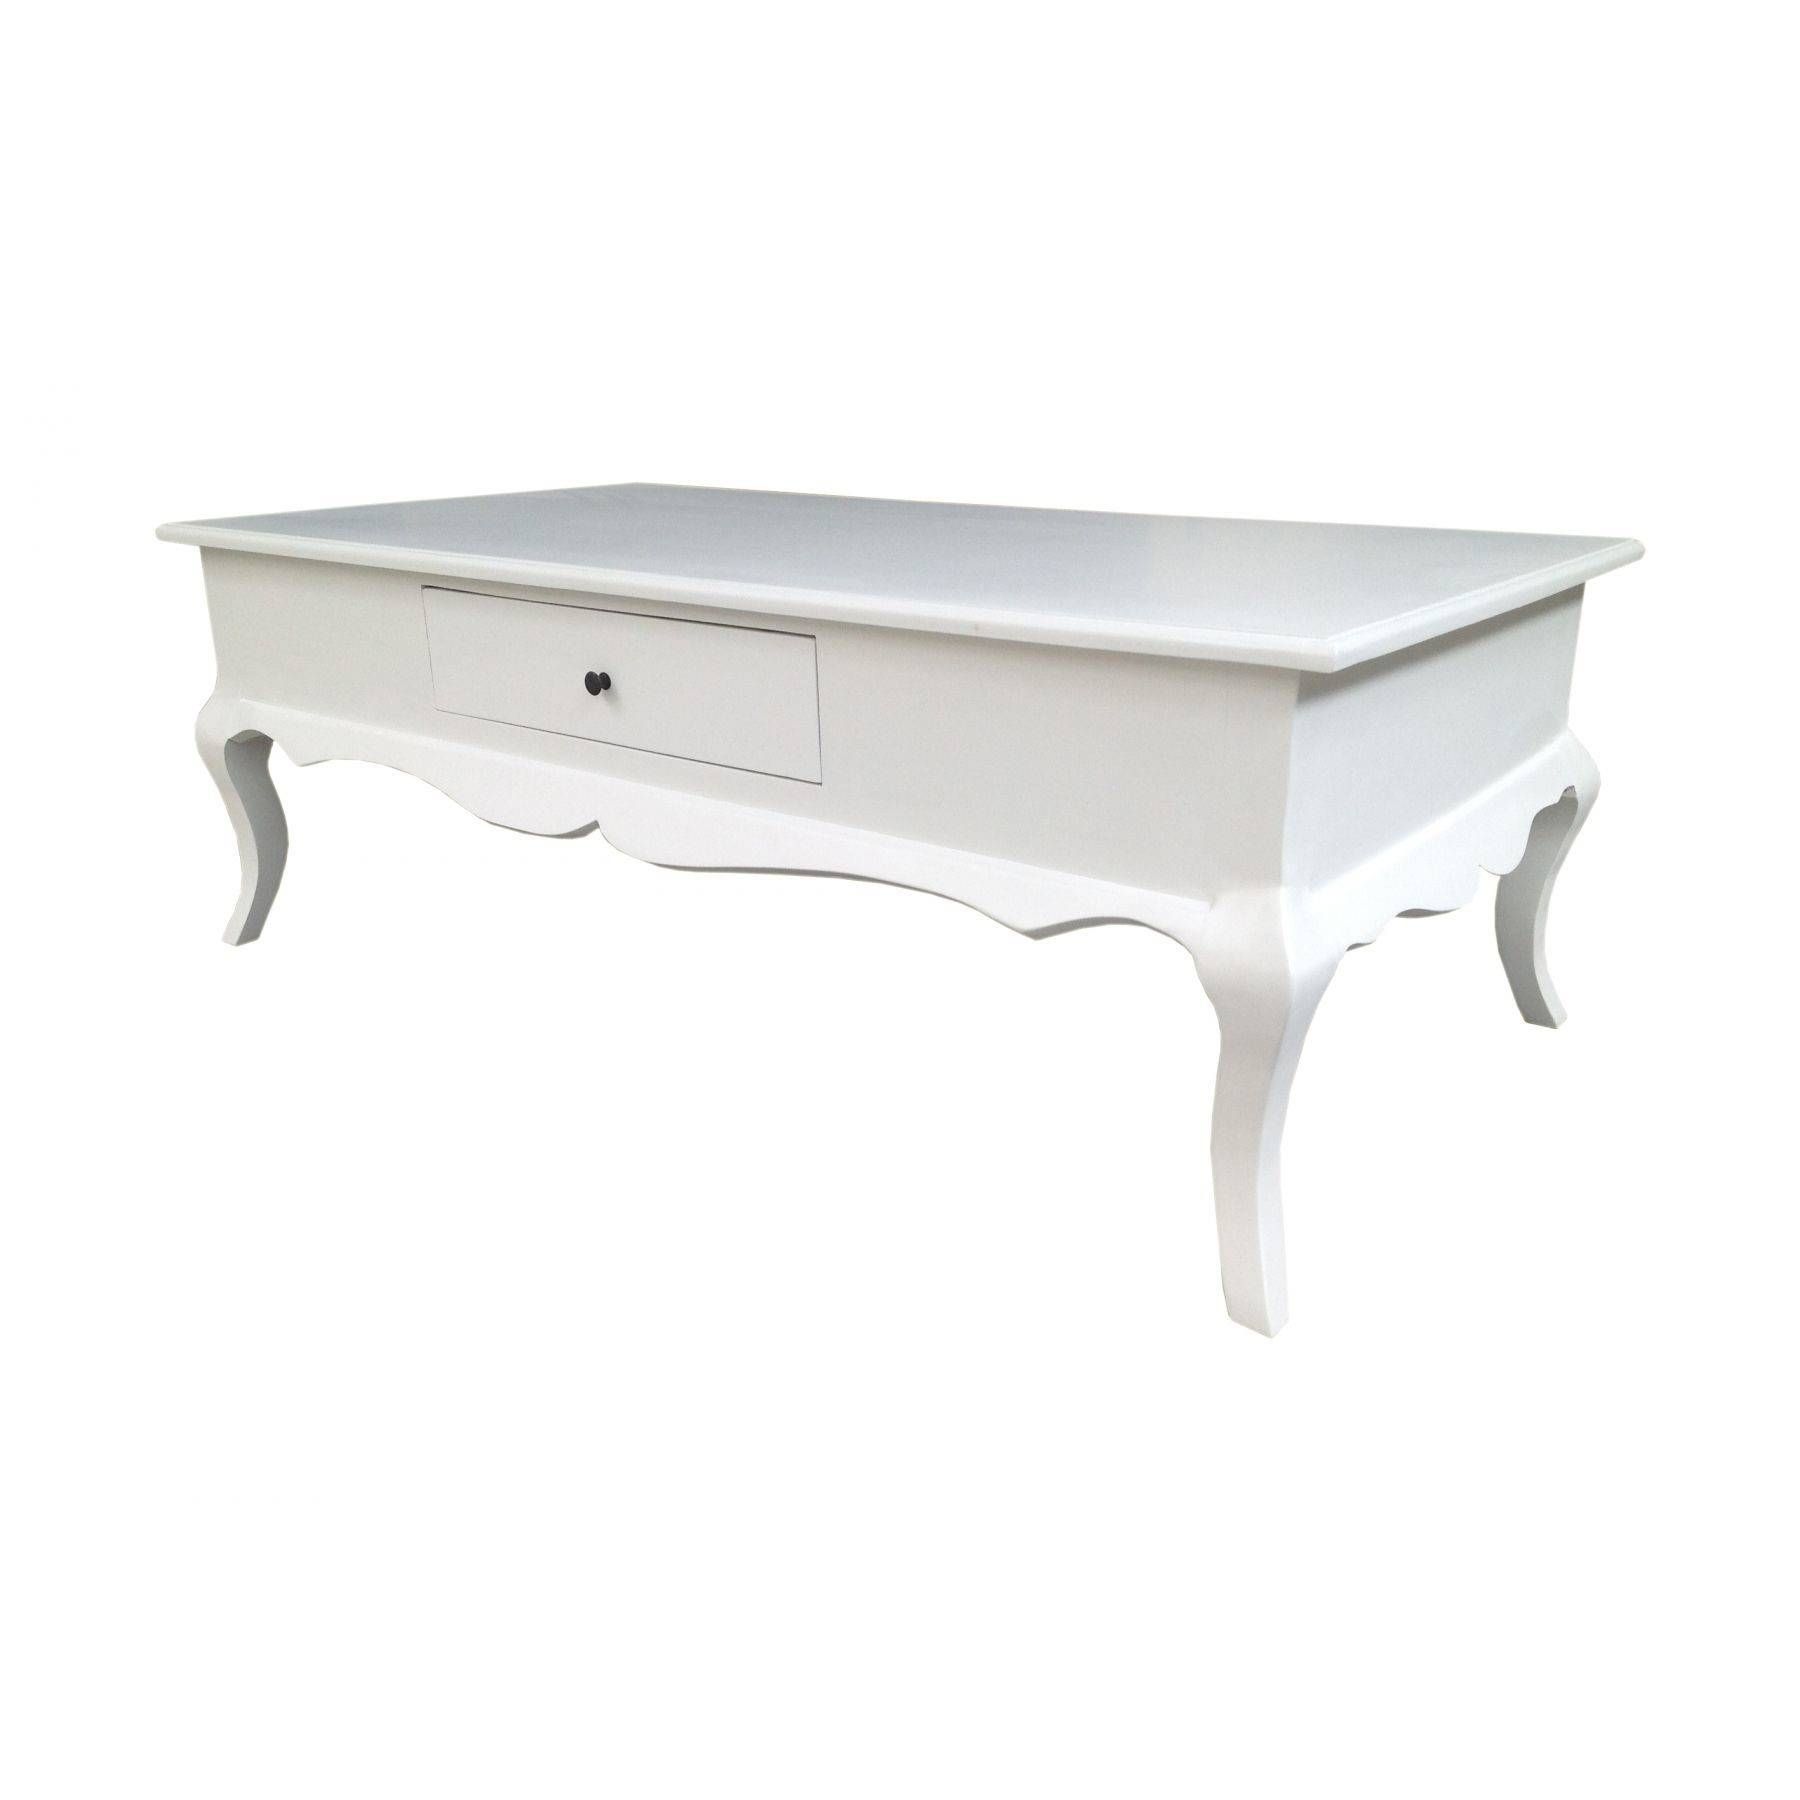 Furniture. French Coffee Table Design Ideas: Brown And White Within White French Coffee Tables (Photo 1 of 30)